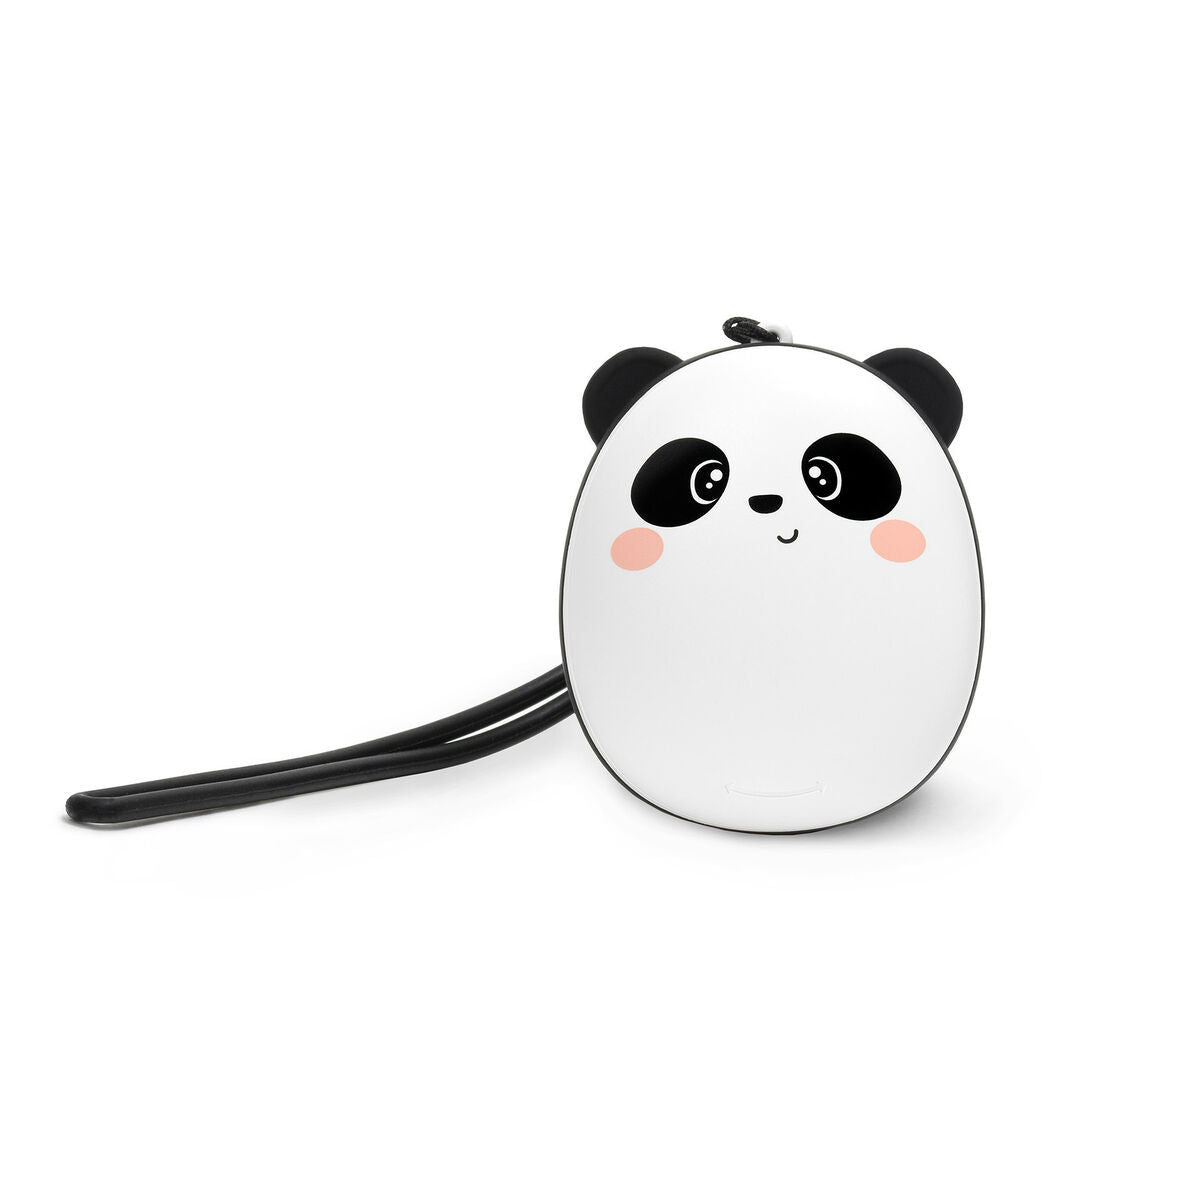 Fab Gifts | Legami Wireless Earbuds Panda by Weirs of Baggot Street